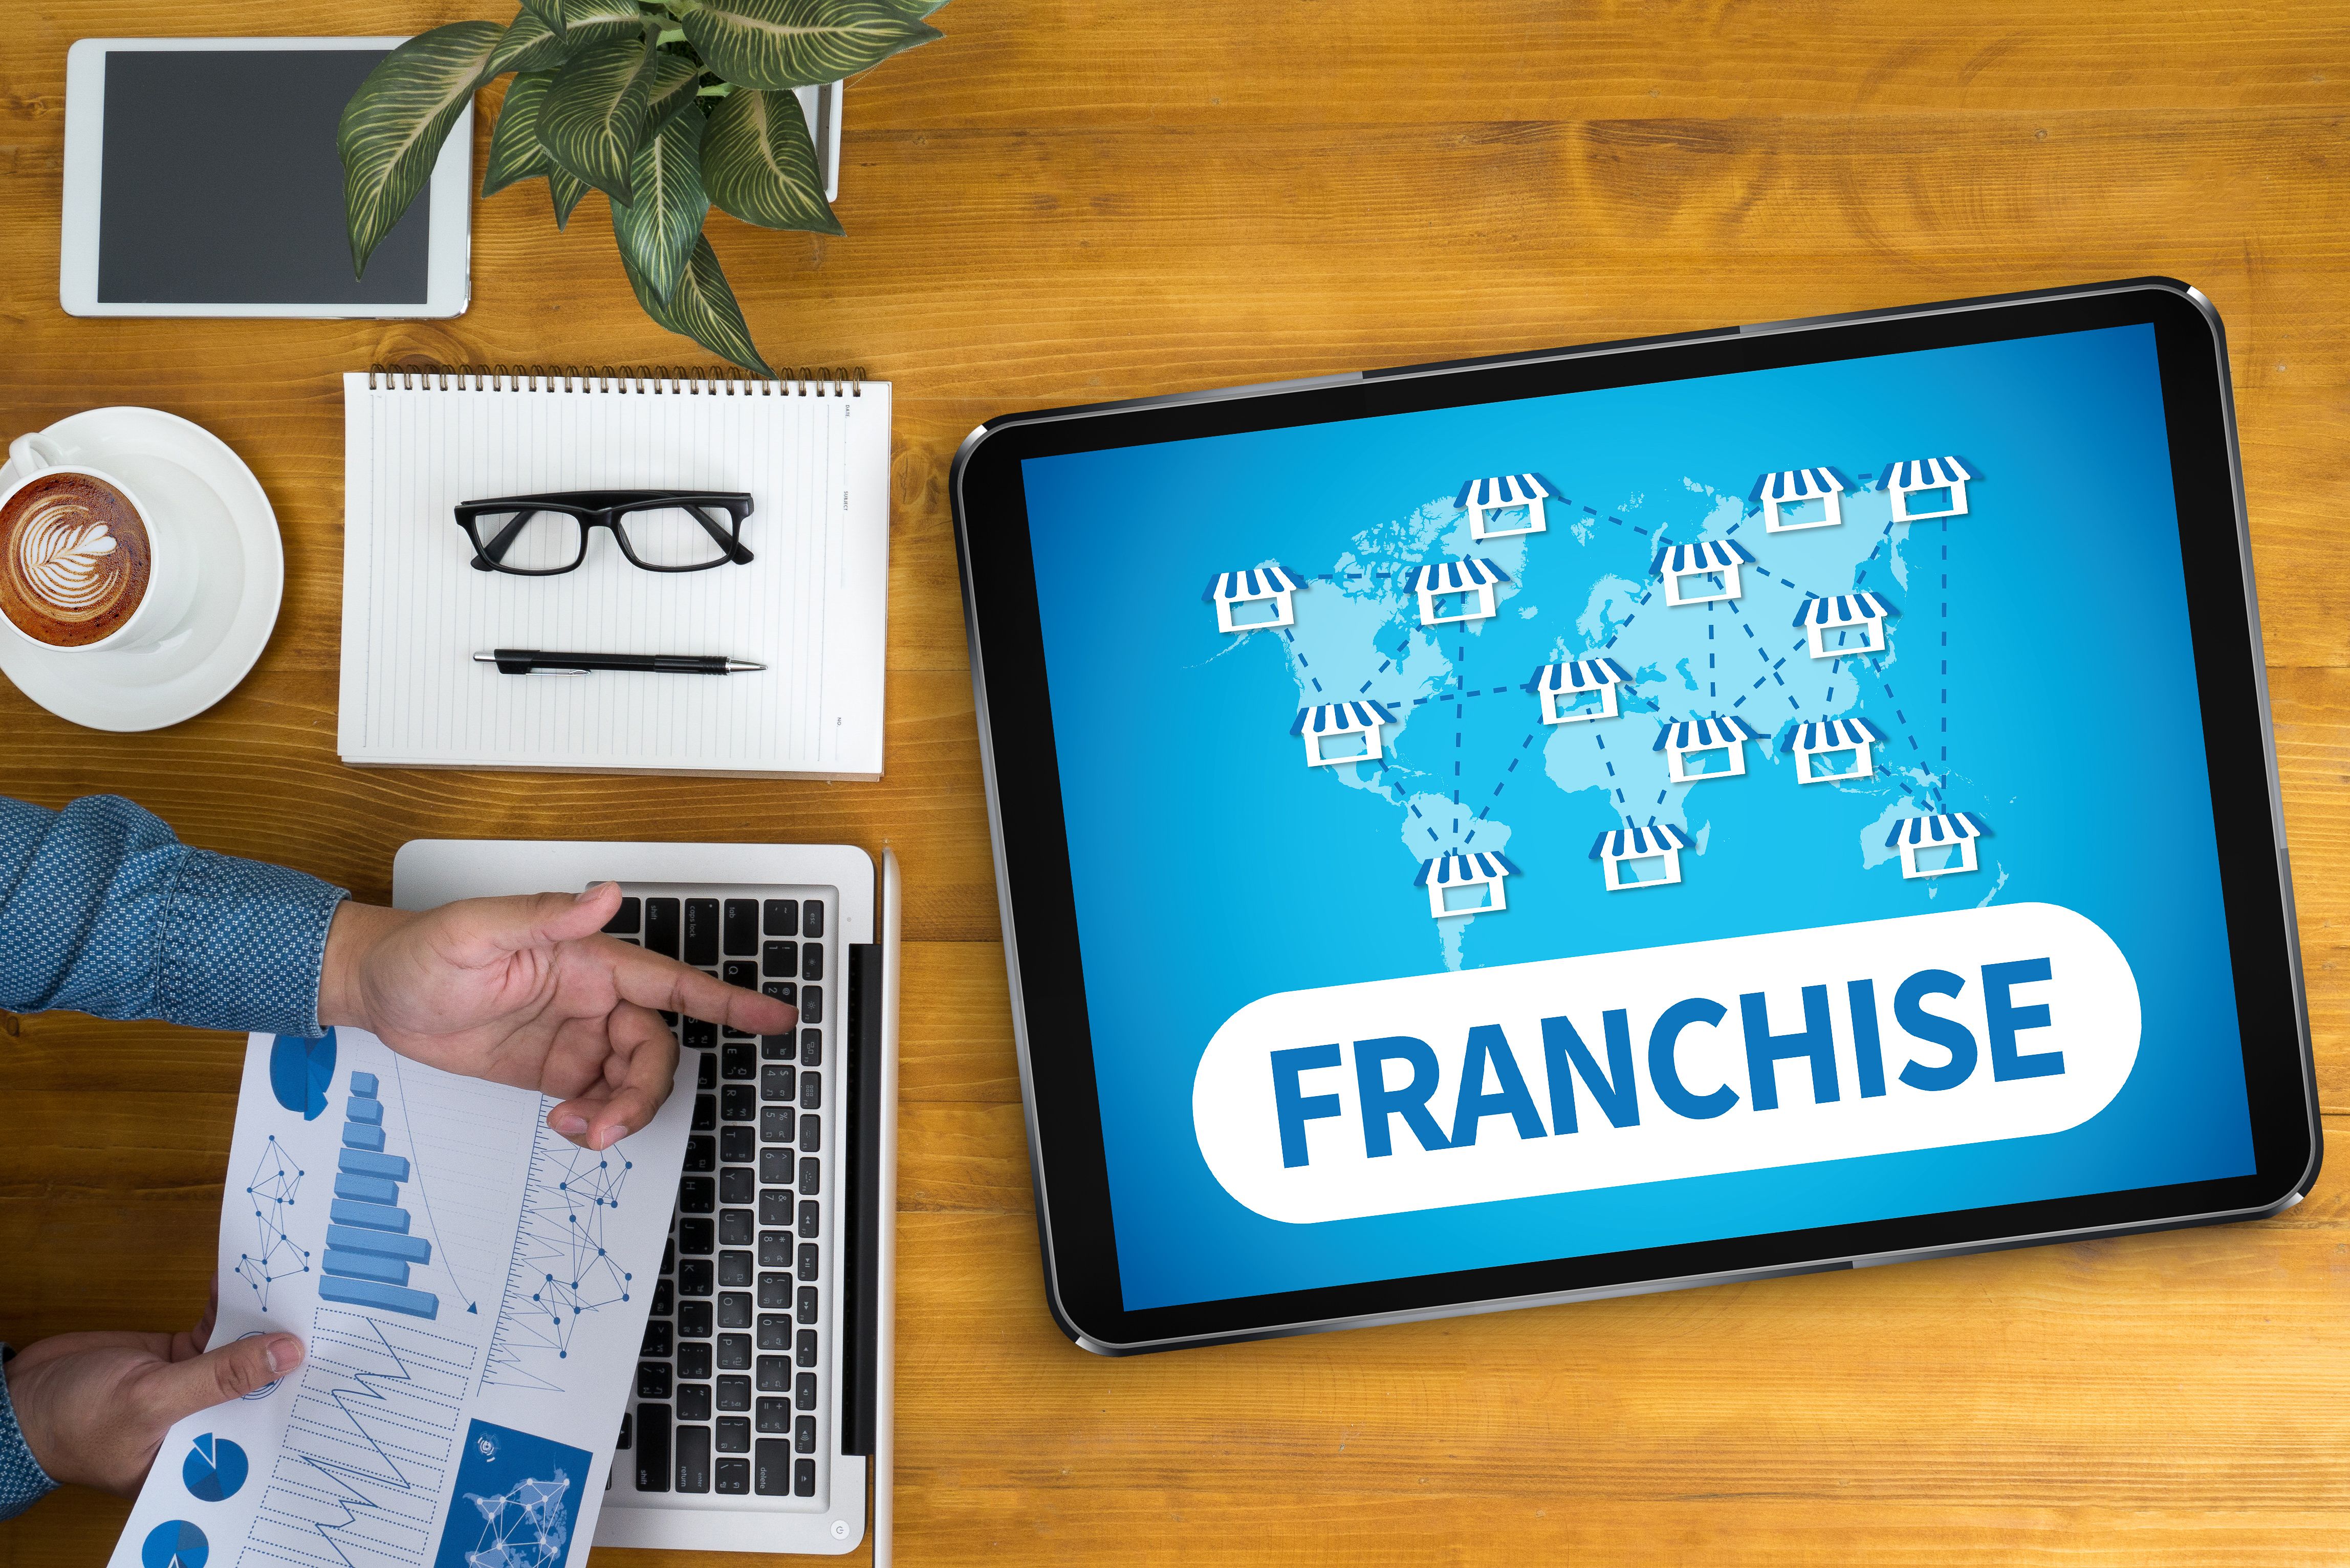 Protect the brand, boost your value: Ten things to know about franchising and IP